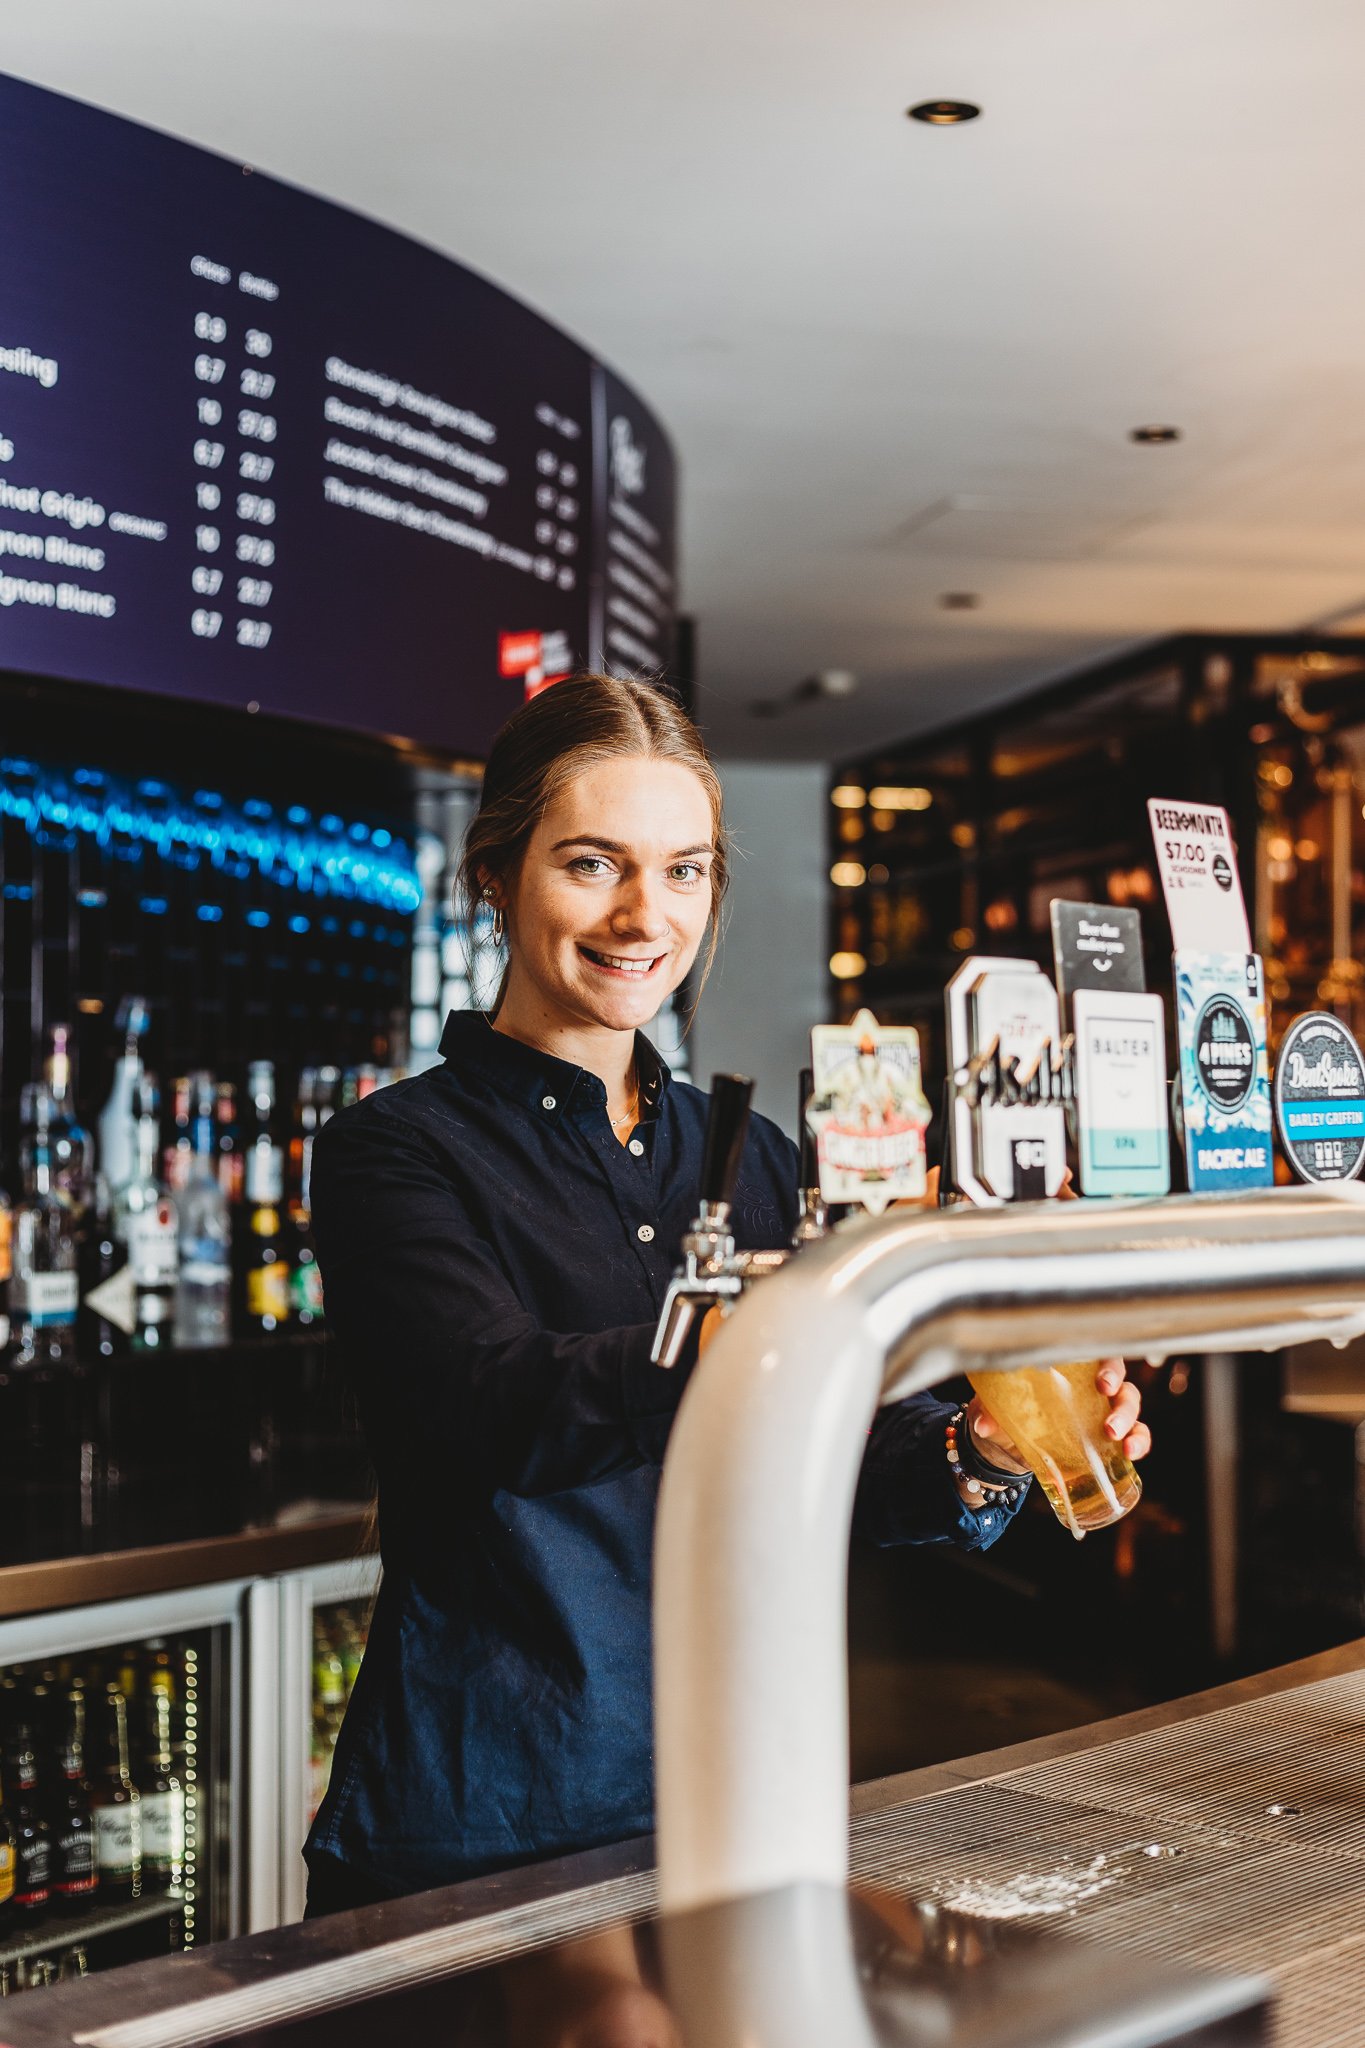 Canberra food photographer - smiling woman pours beer